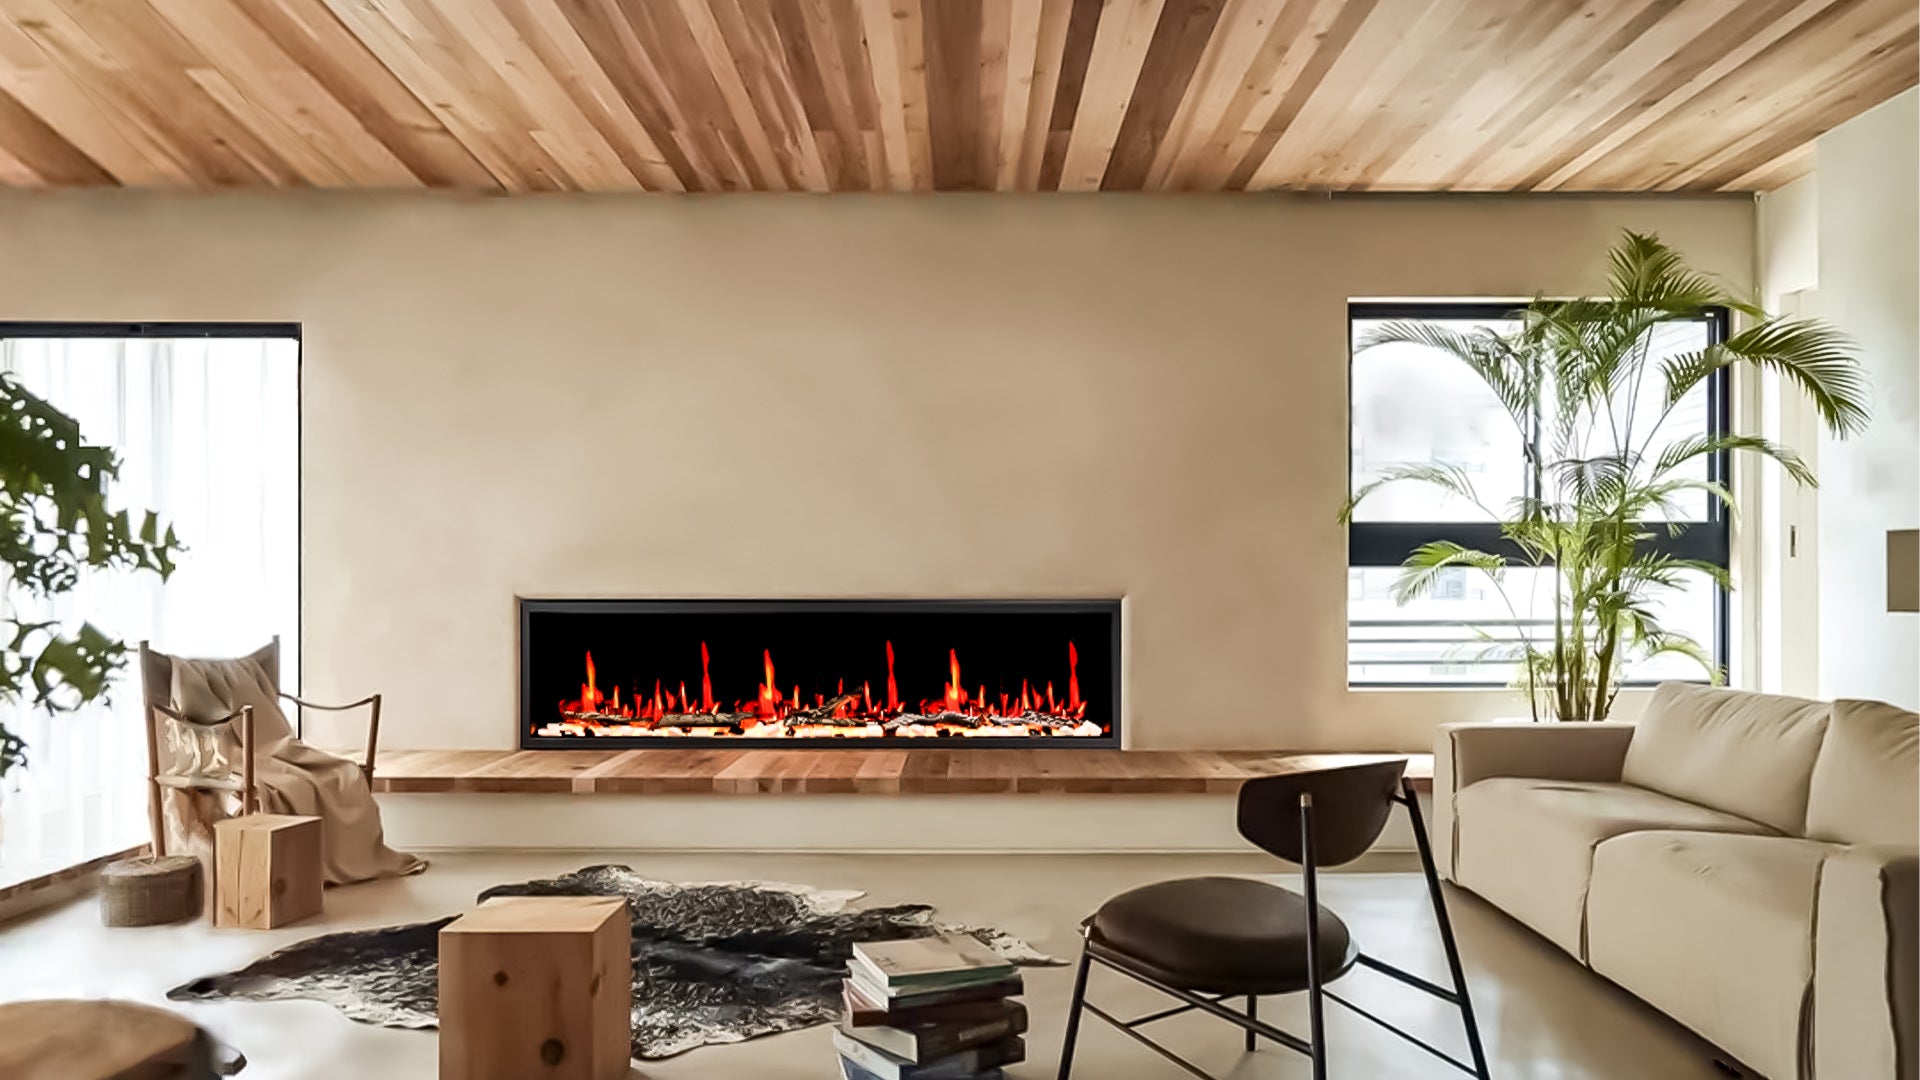 Zopflame 76 inch built-in linear electric fireplace for living room